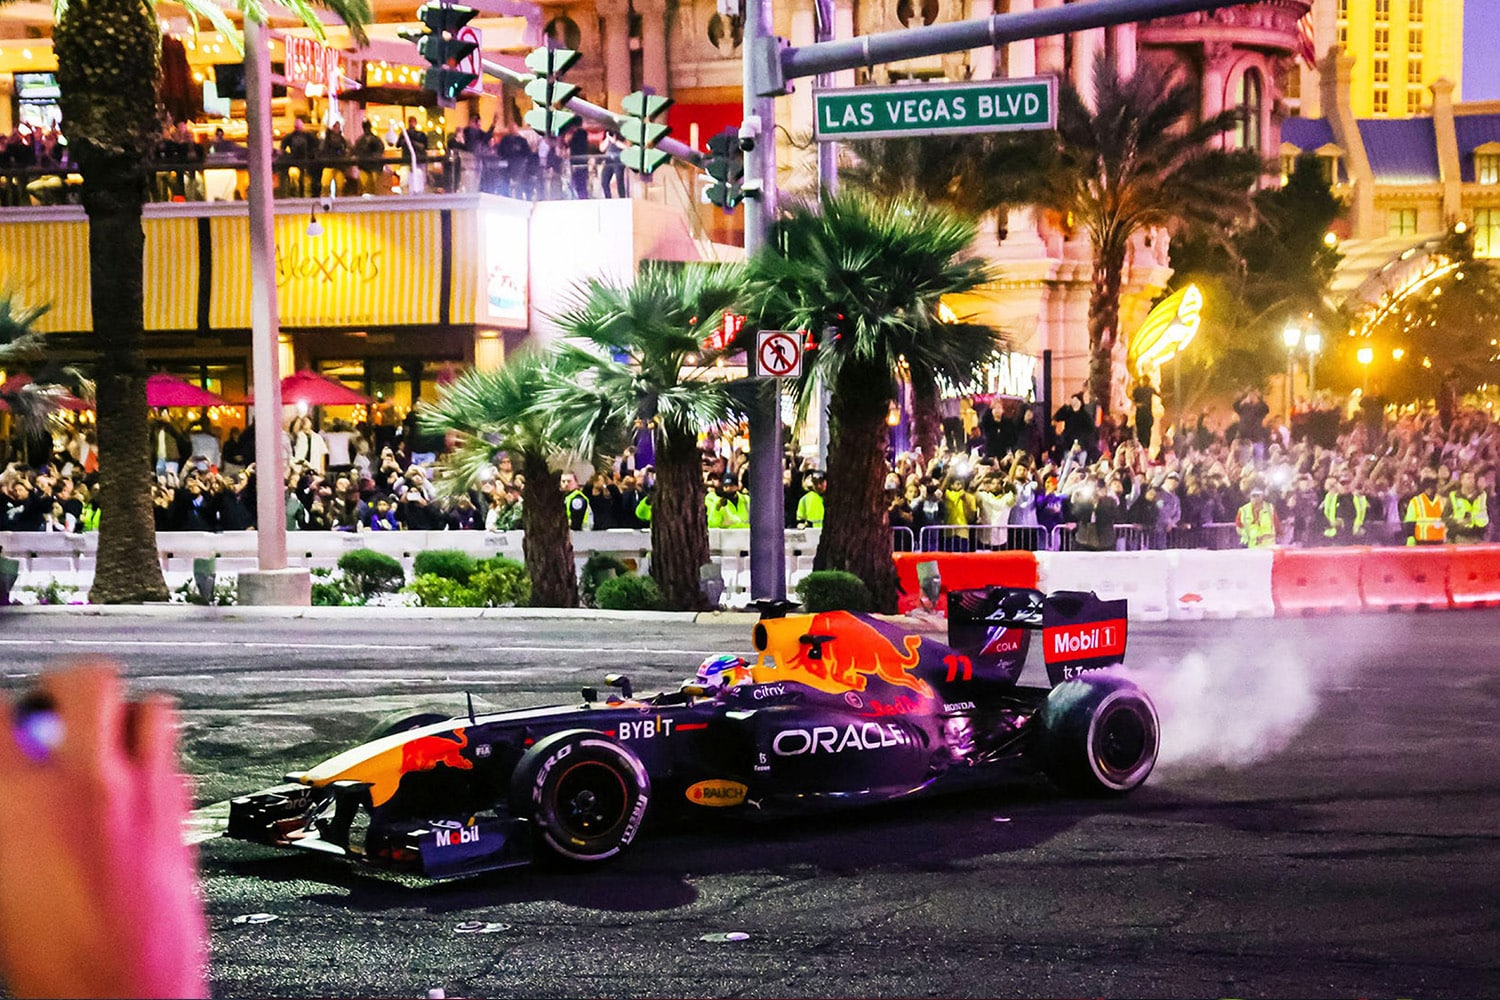 Vegas Resorts Going All Out for Formula 1 Grand Prix